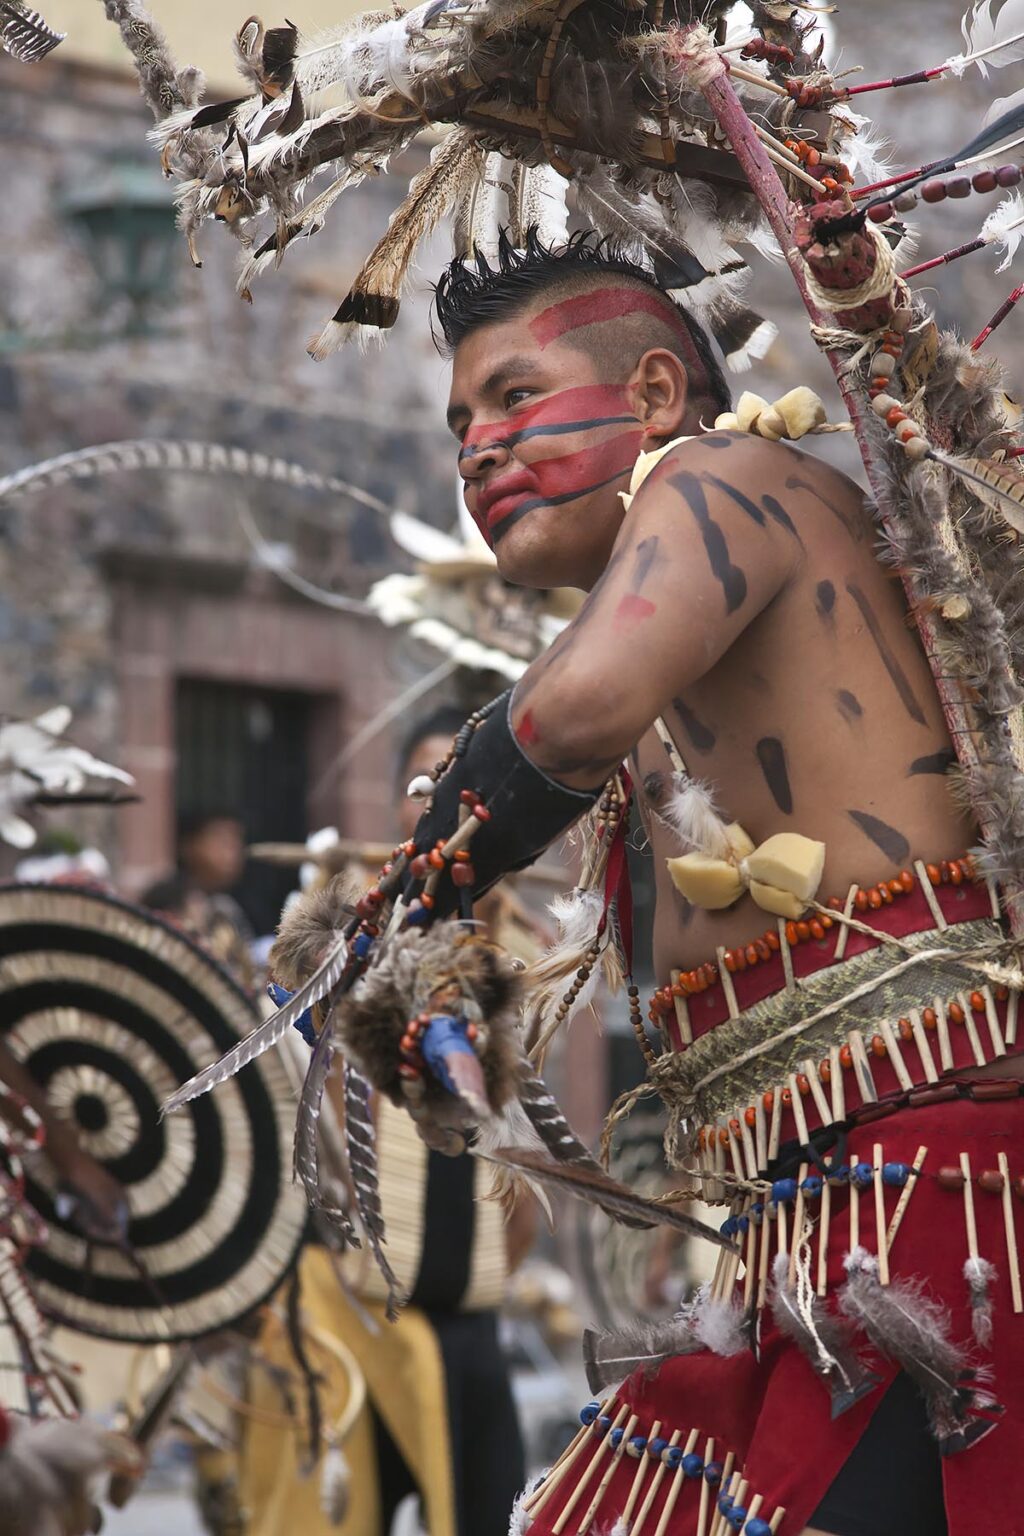 INDIGENOUS DANCE TROUPES from all over MEXICO parade through the streets in celebration of San Miguel Arcangel, the patron saint of SAN MIGUEL DE ALLENDE each October